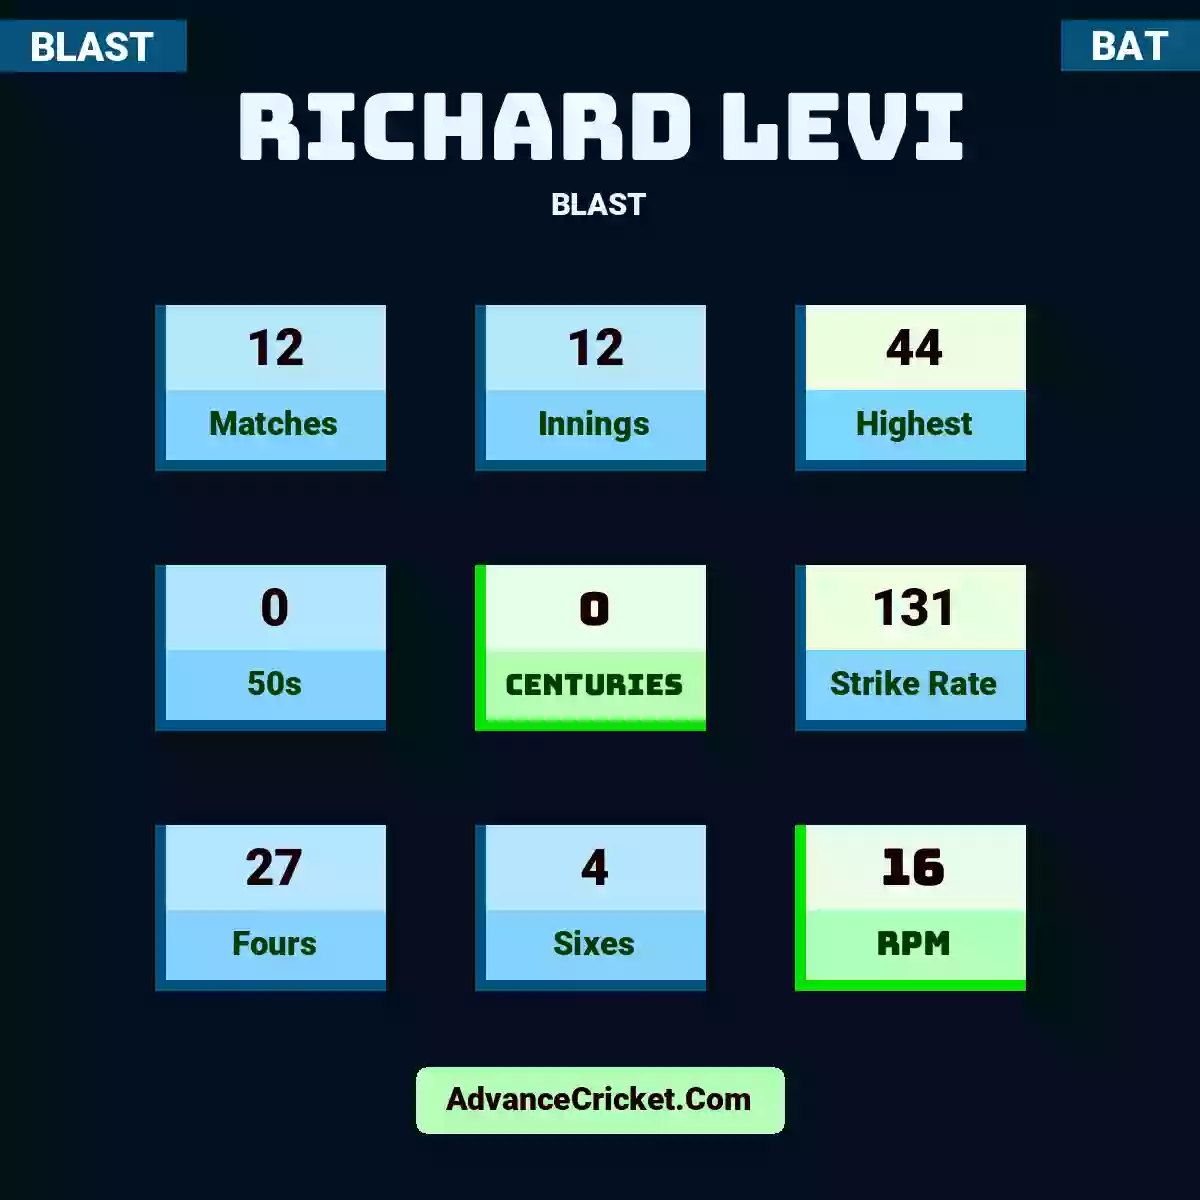 Richard Levi BLAST , Richard Levi played 12 matches, scored 44 runs as highest, 0 half-centuries, and 0 centuries, with a strike rate of 131. R.Levi hit 27 fours and 4 sixes, with an RPM of 16.